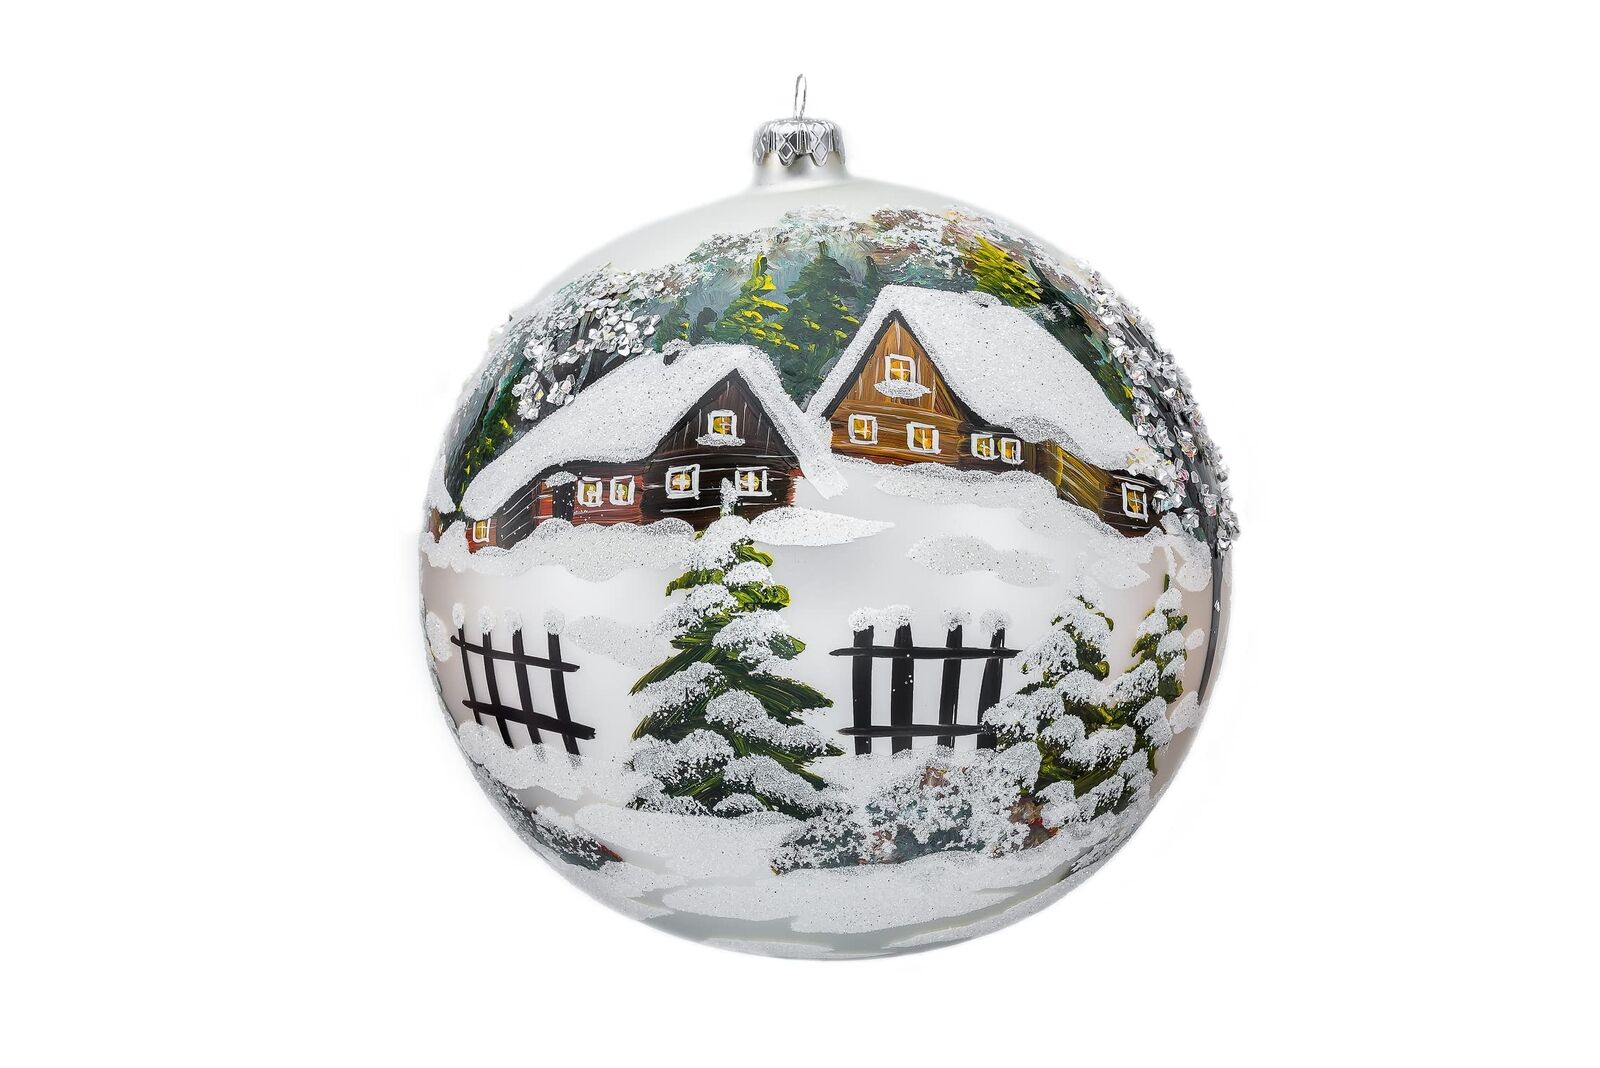 Polish Gallery Christmas Ornament Cottage Houses Large Blown Glass Ball 8-inc...